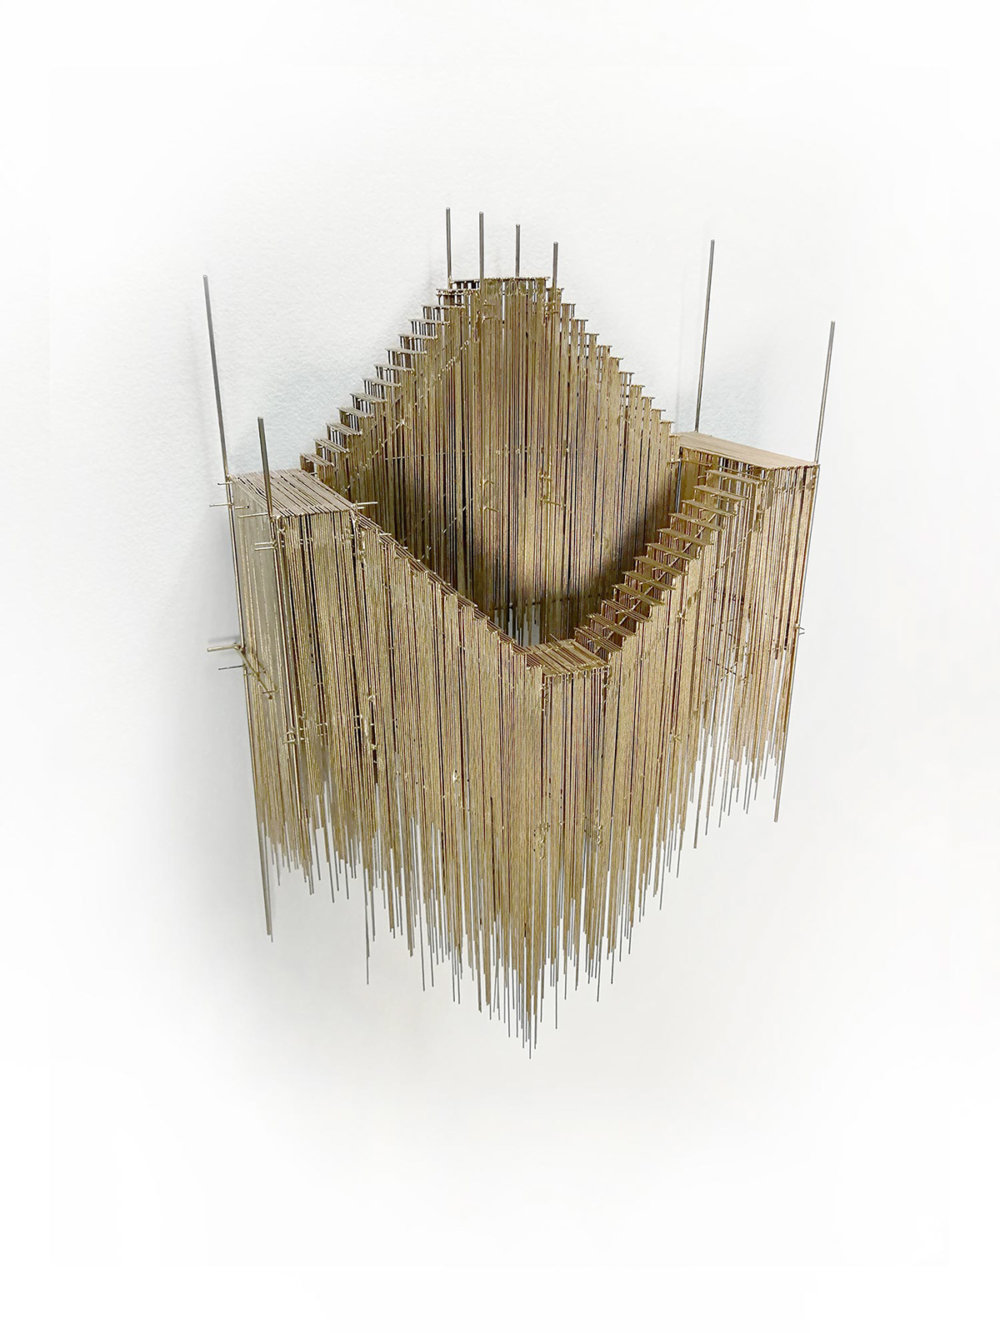 Metal Sketches Architectural Steel Wire Sculptures By David Moreno 10